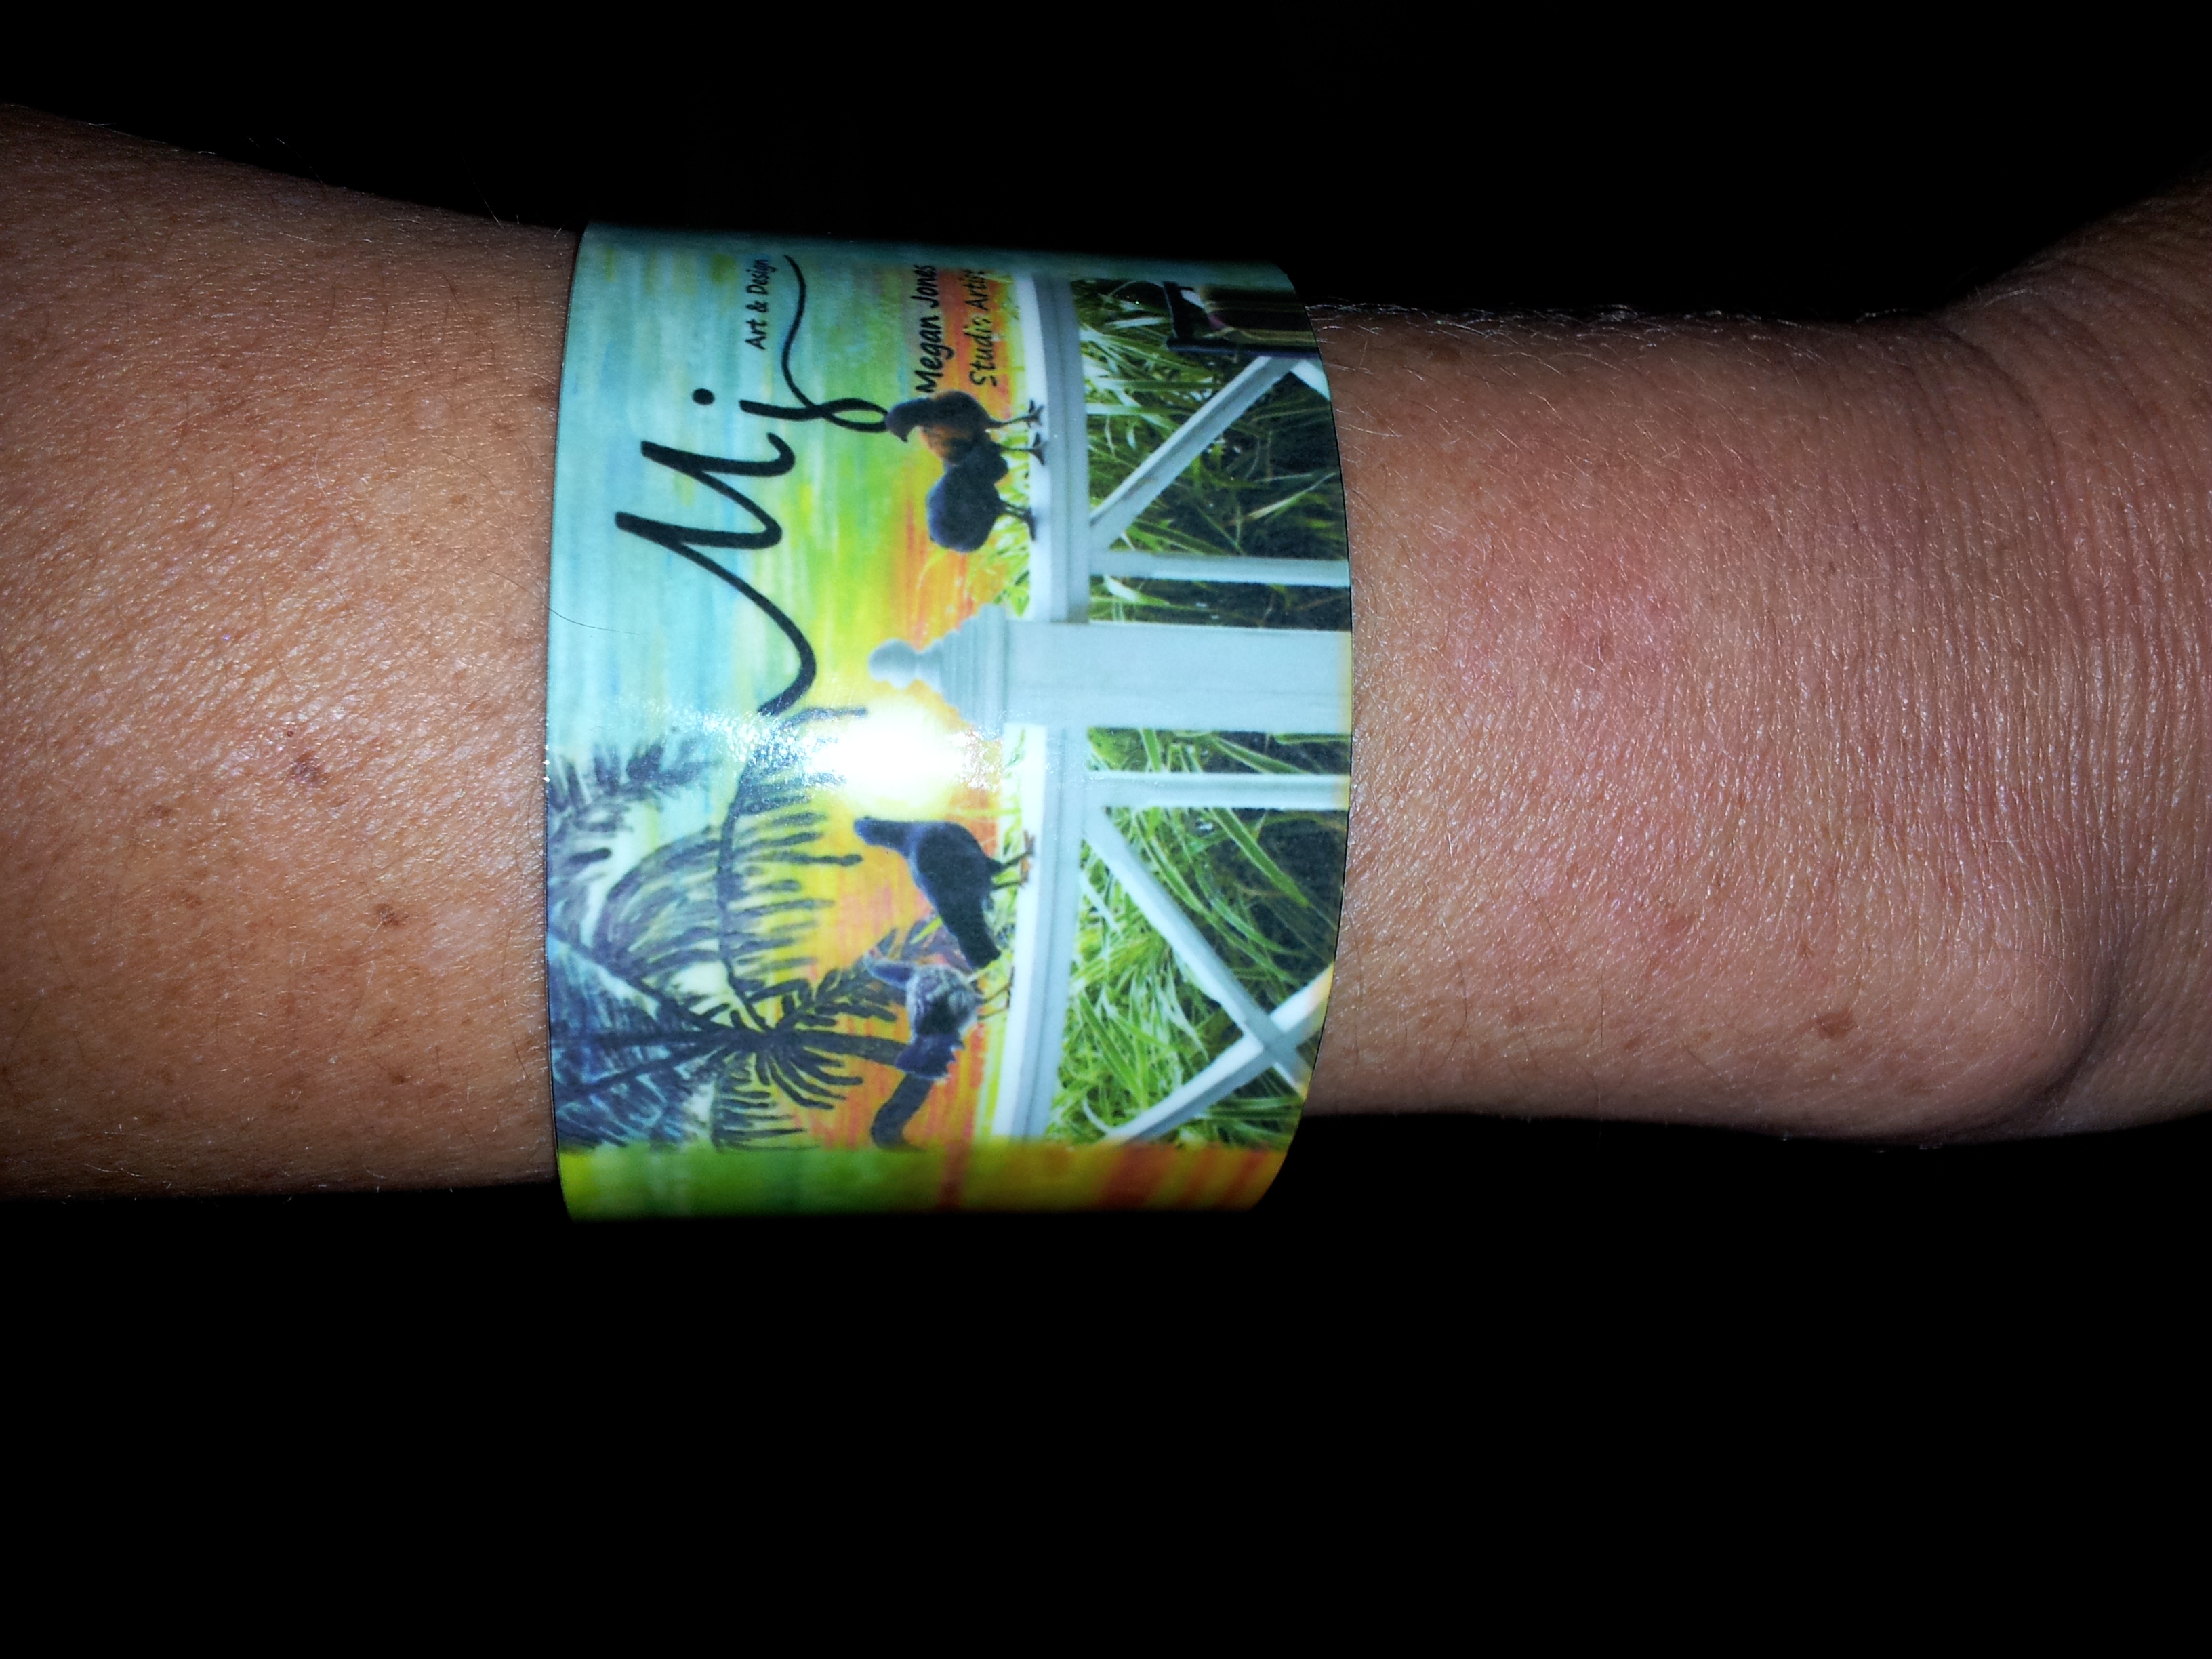 lil chickens bracelet made with sublimation printing